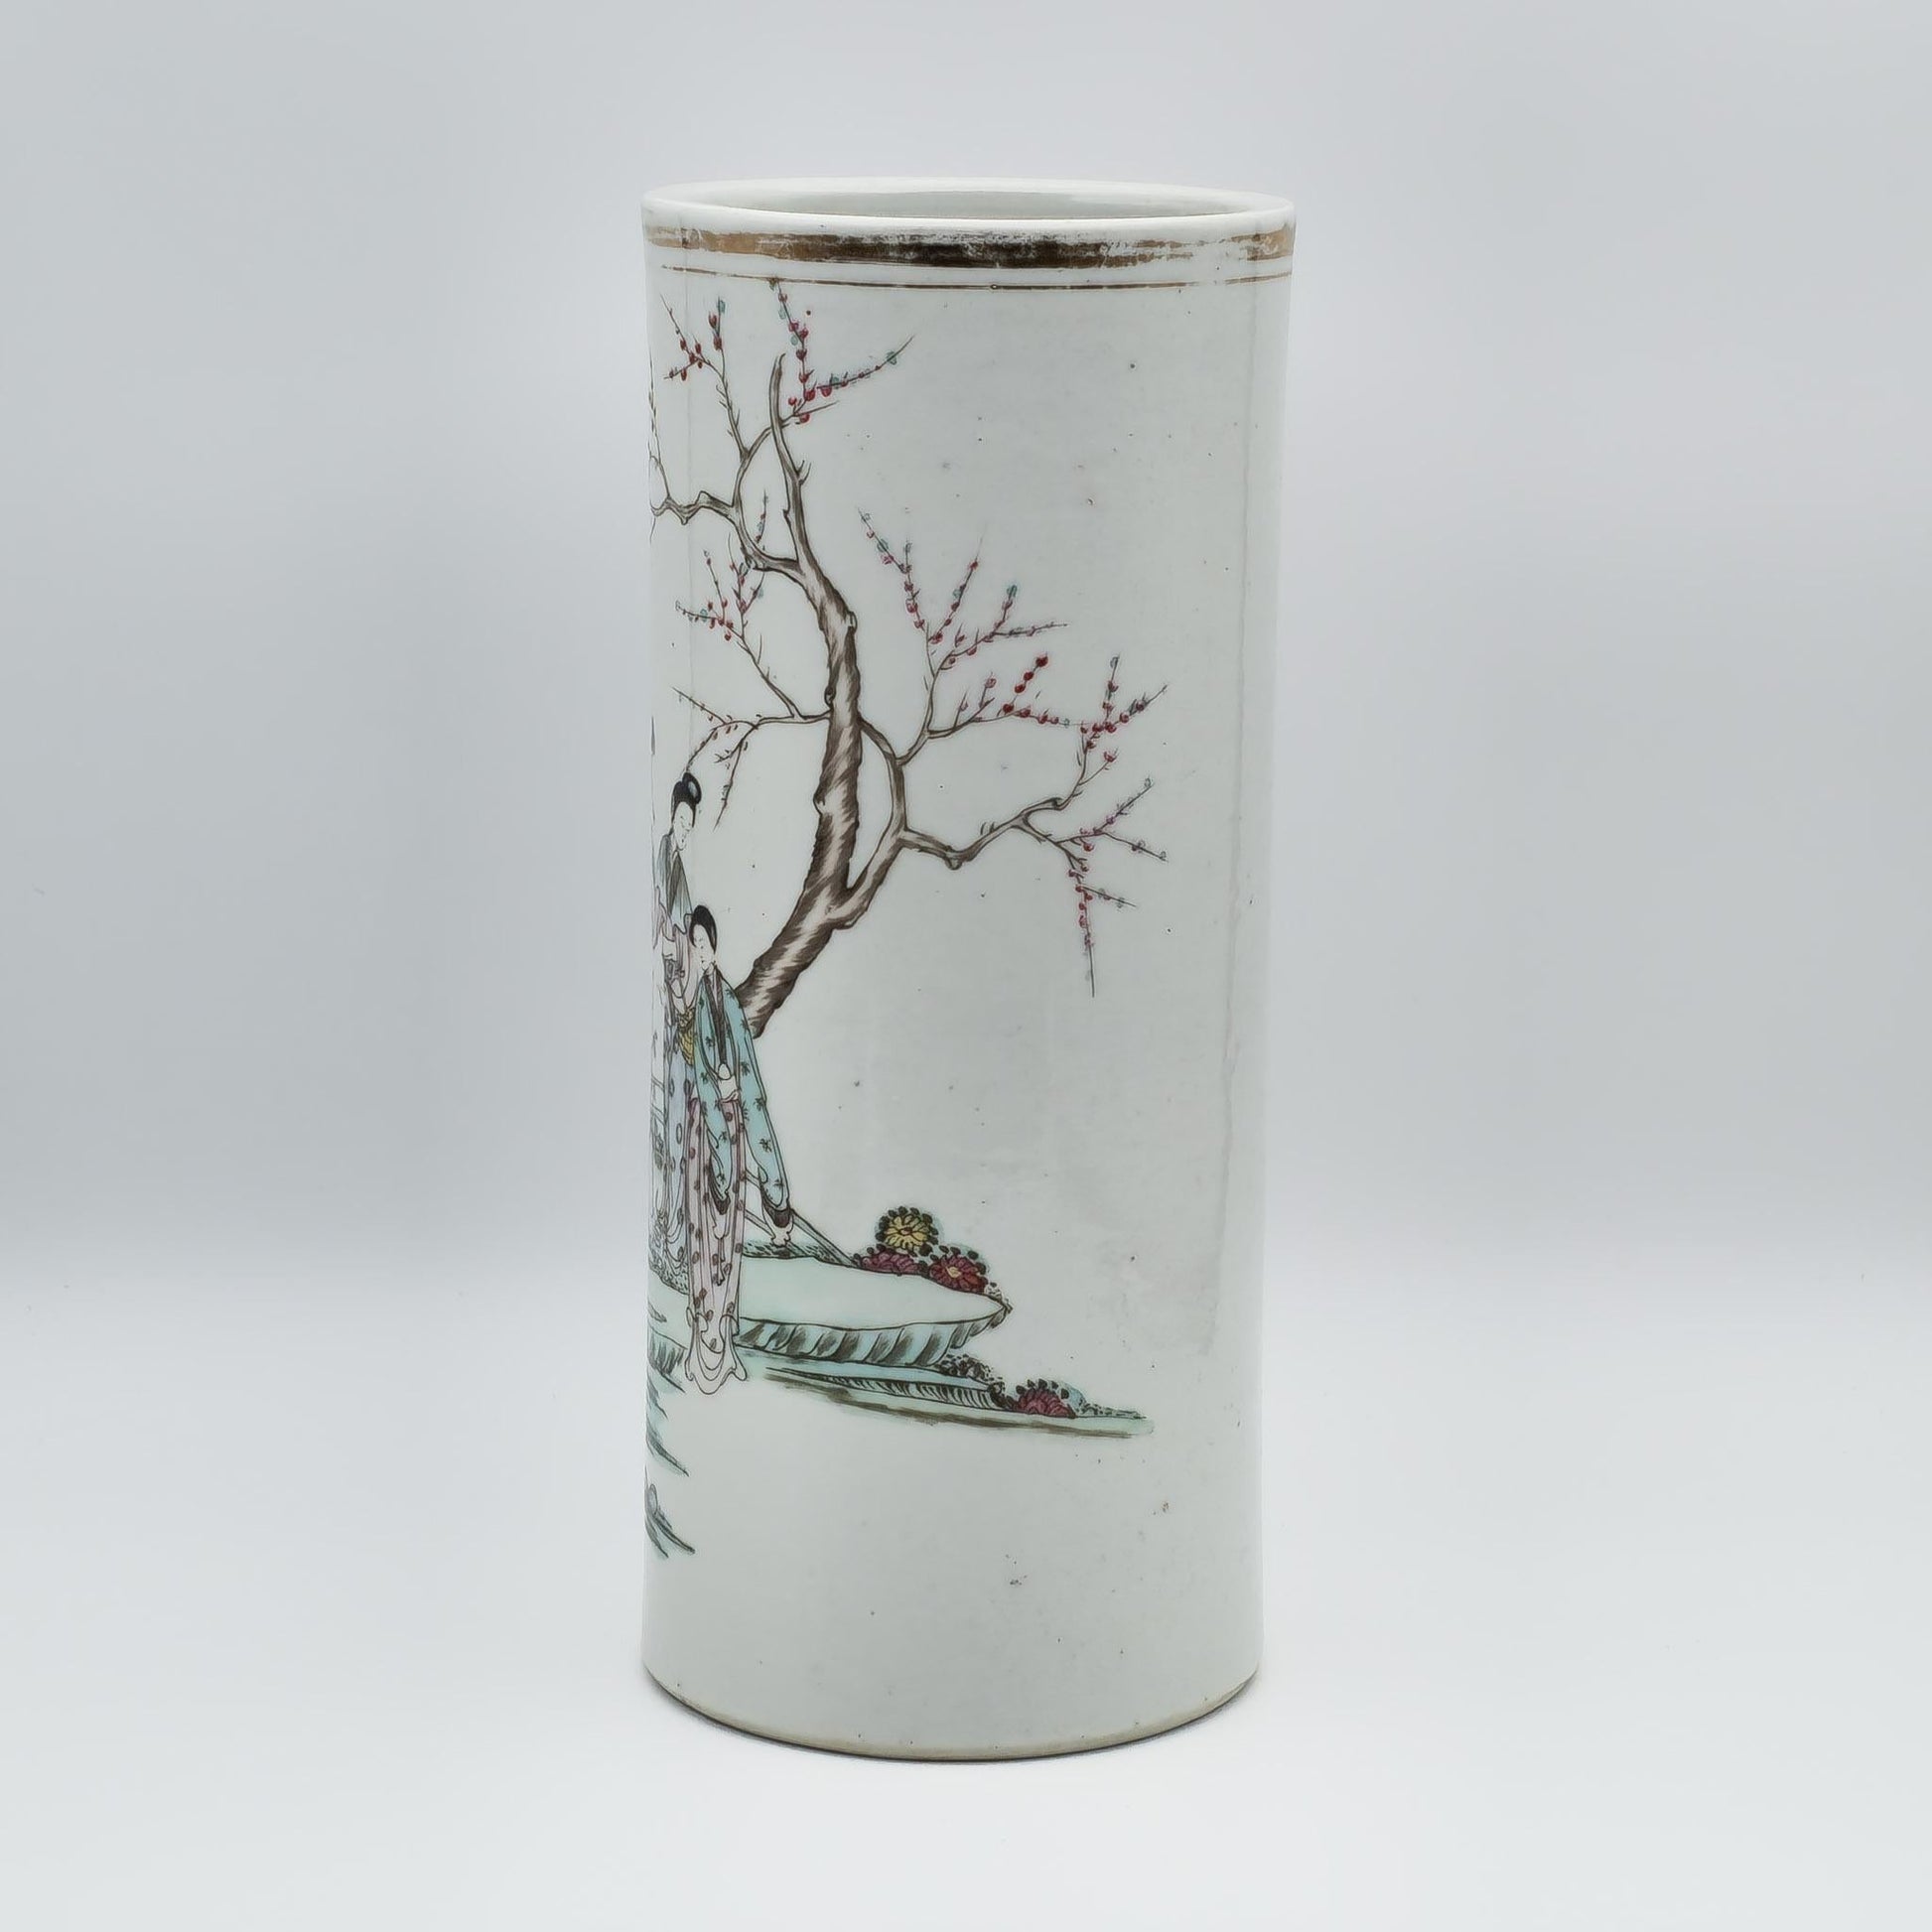 Chinese 20thC. Famille Rose Sleeve Vase with Women in Garden Setting, Republic Period Mollaris.com 